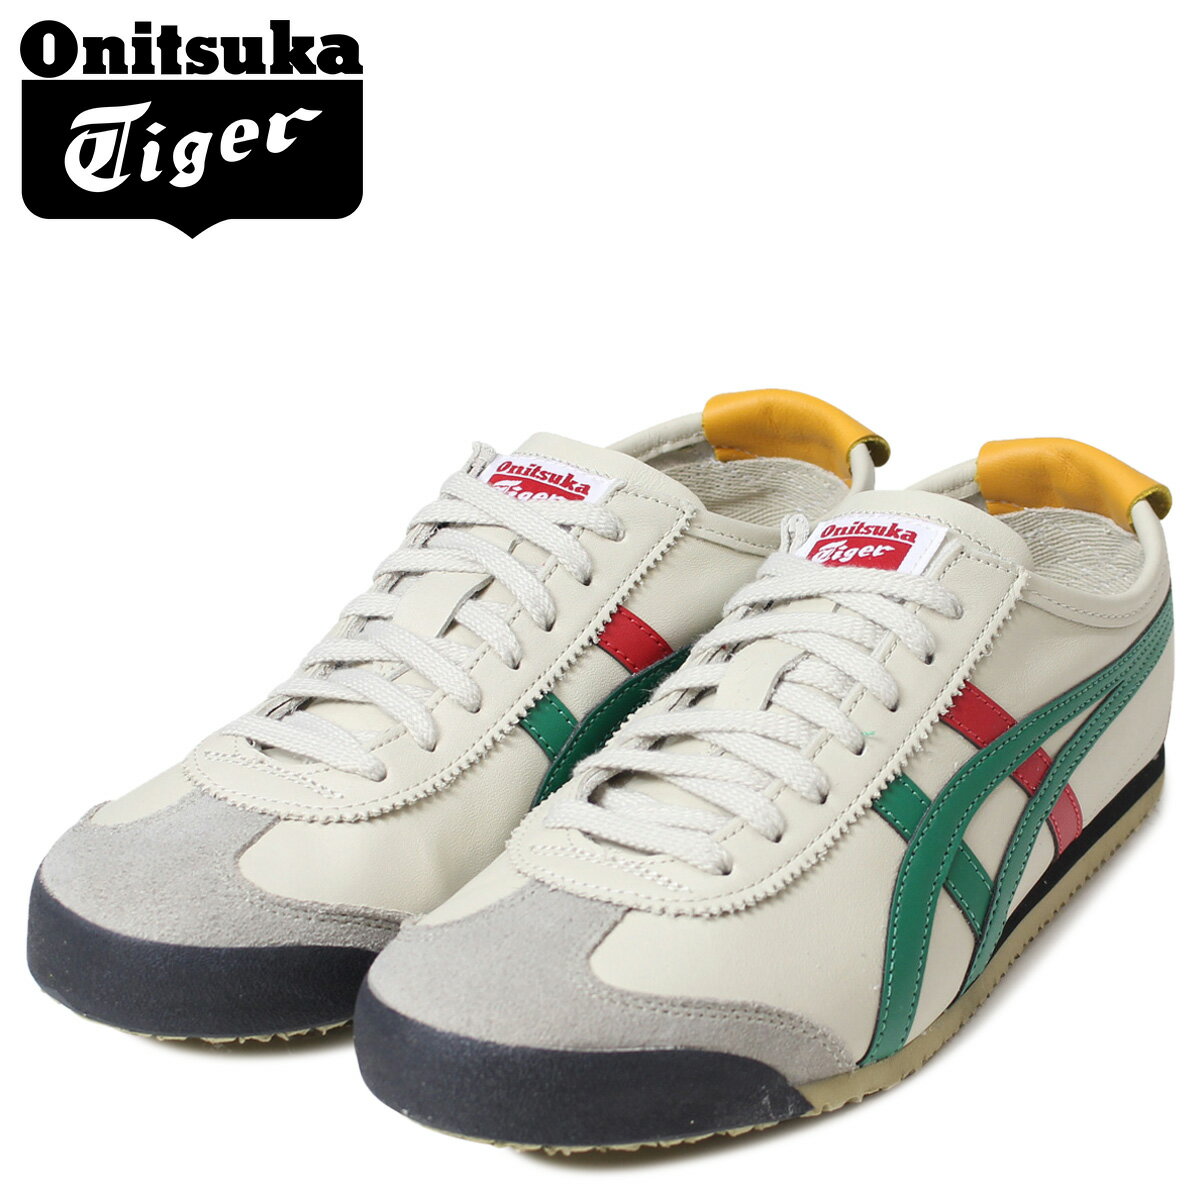 tiger japan shoes \u003e Up to OFF59% Discounted